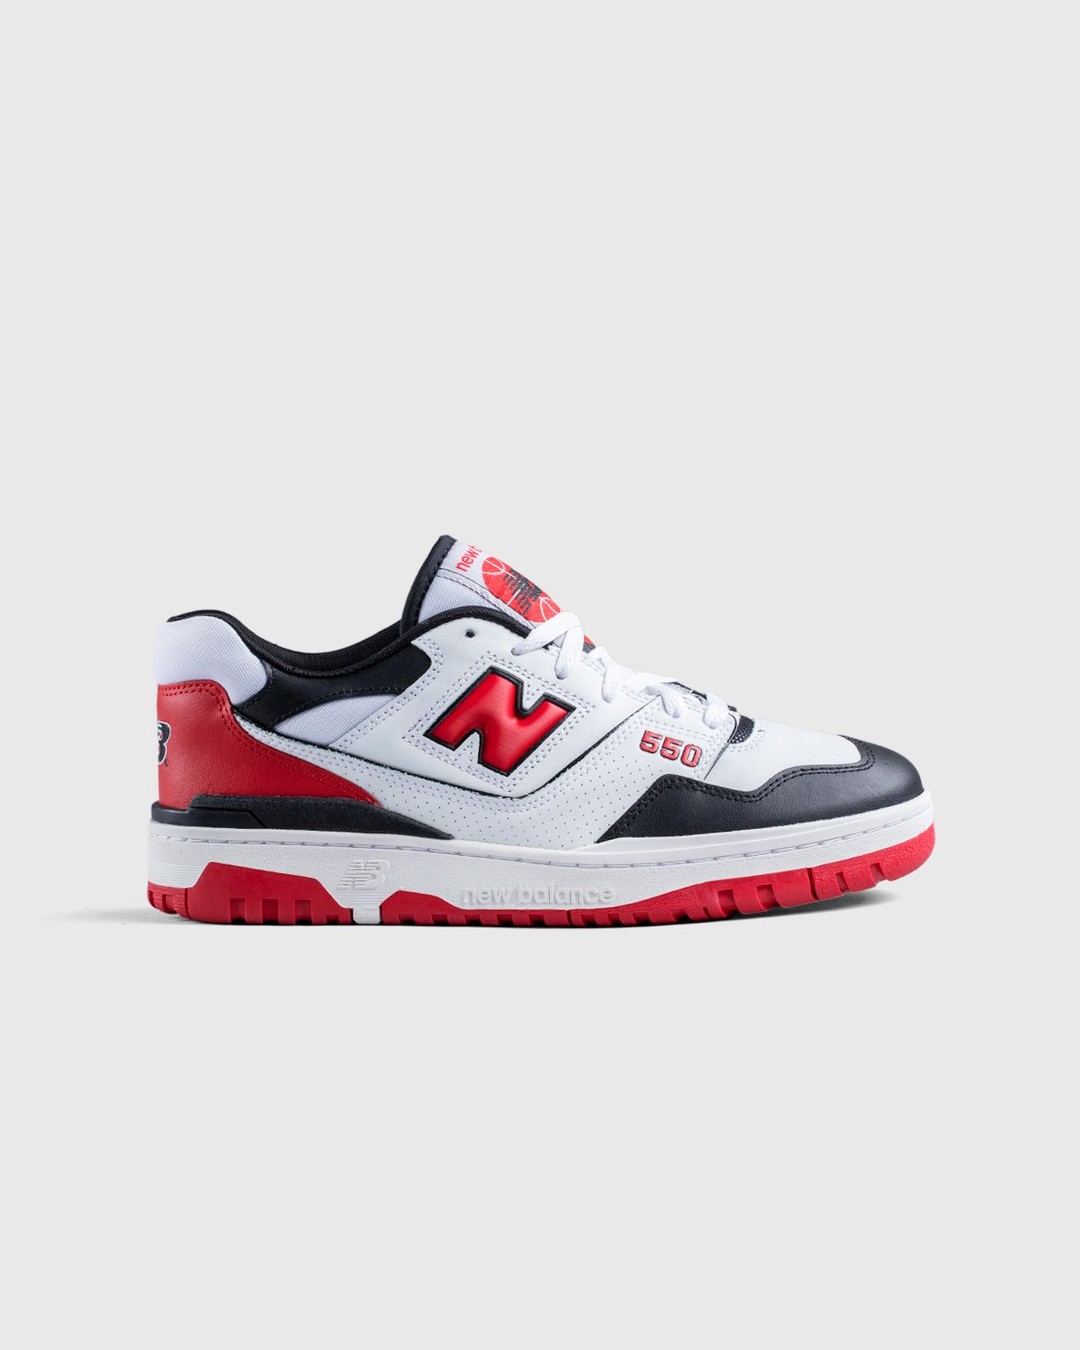 New Balance – BB550HR1 White Red Black - Low Top Sneakers - White - Image 1